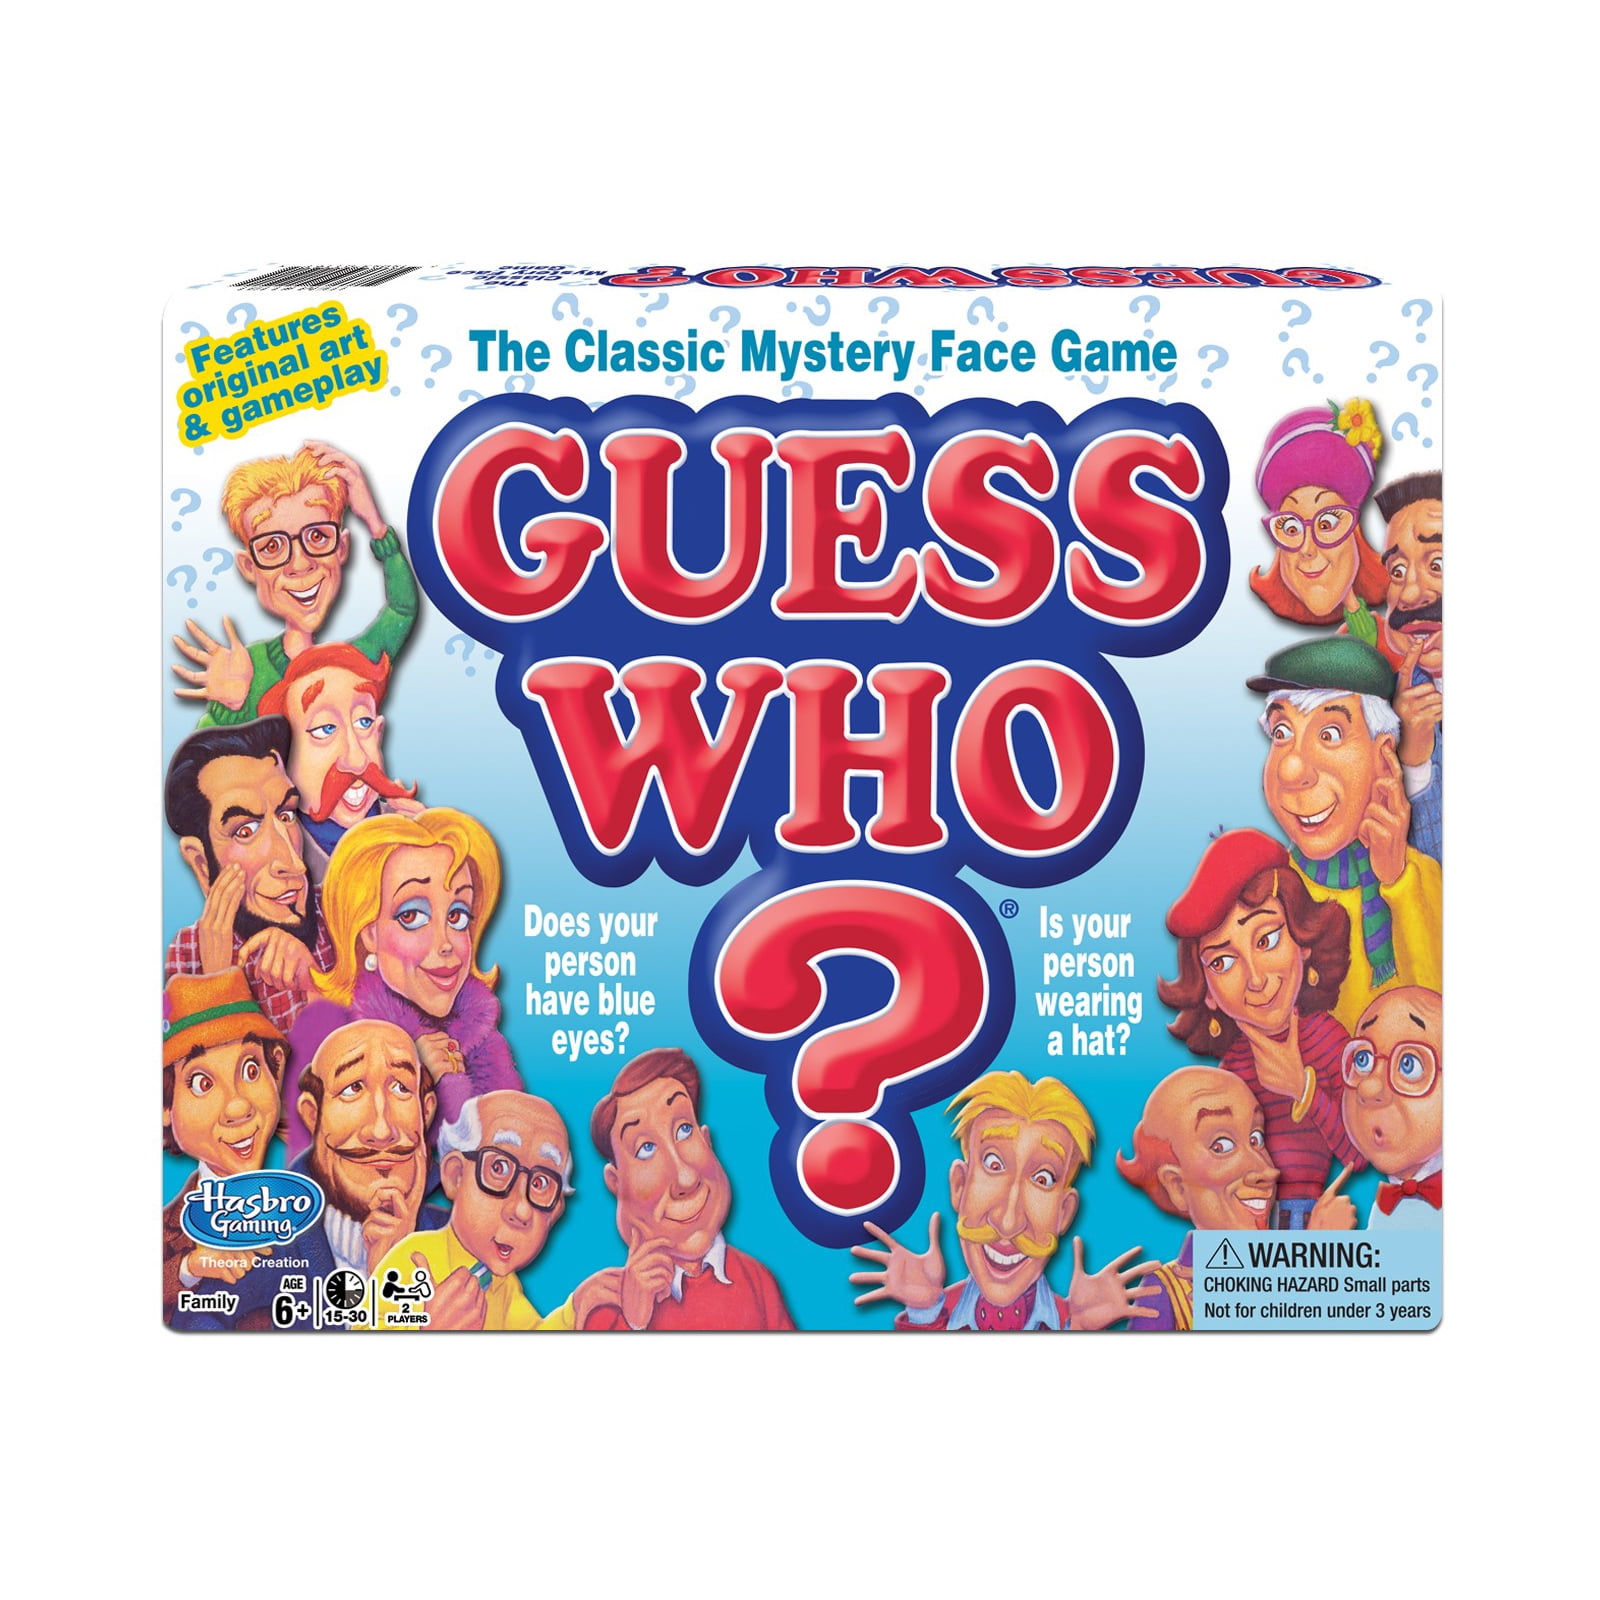 Winning Moves World Football Stars Guess Who Complete Board Game 3 Years and Up